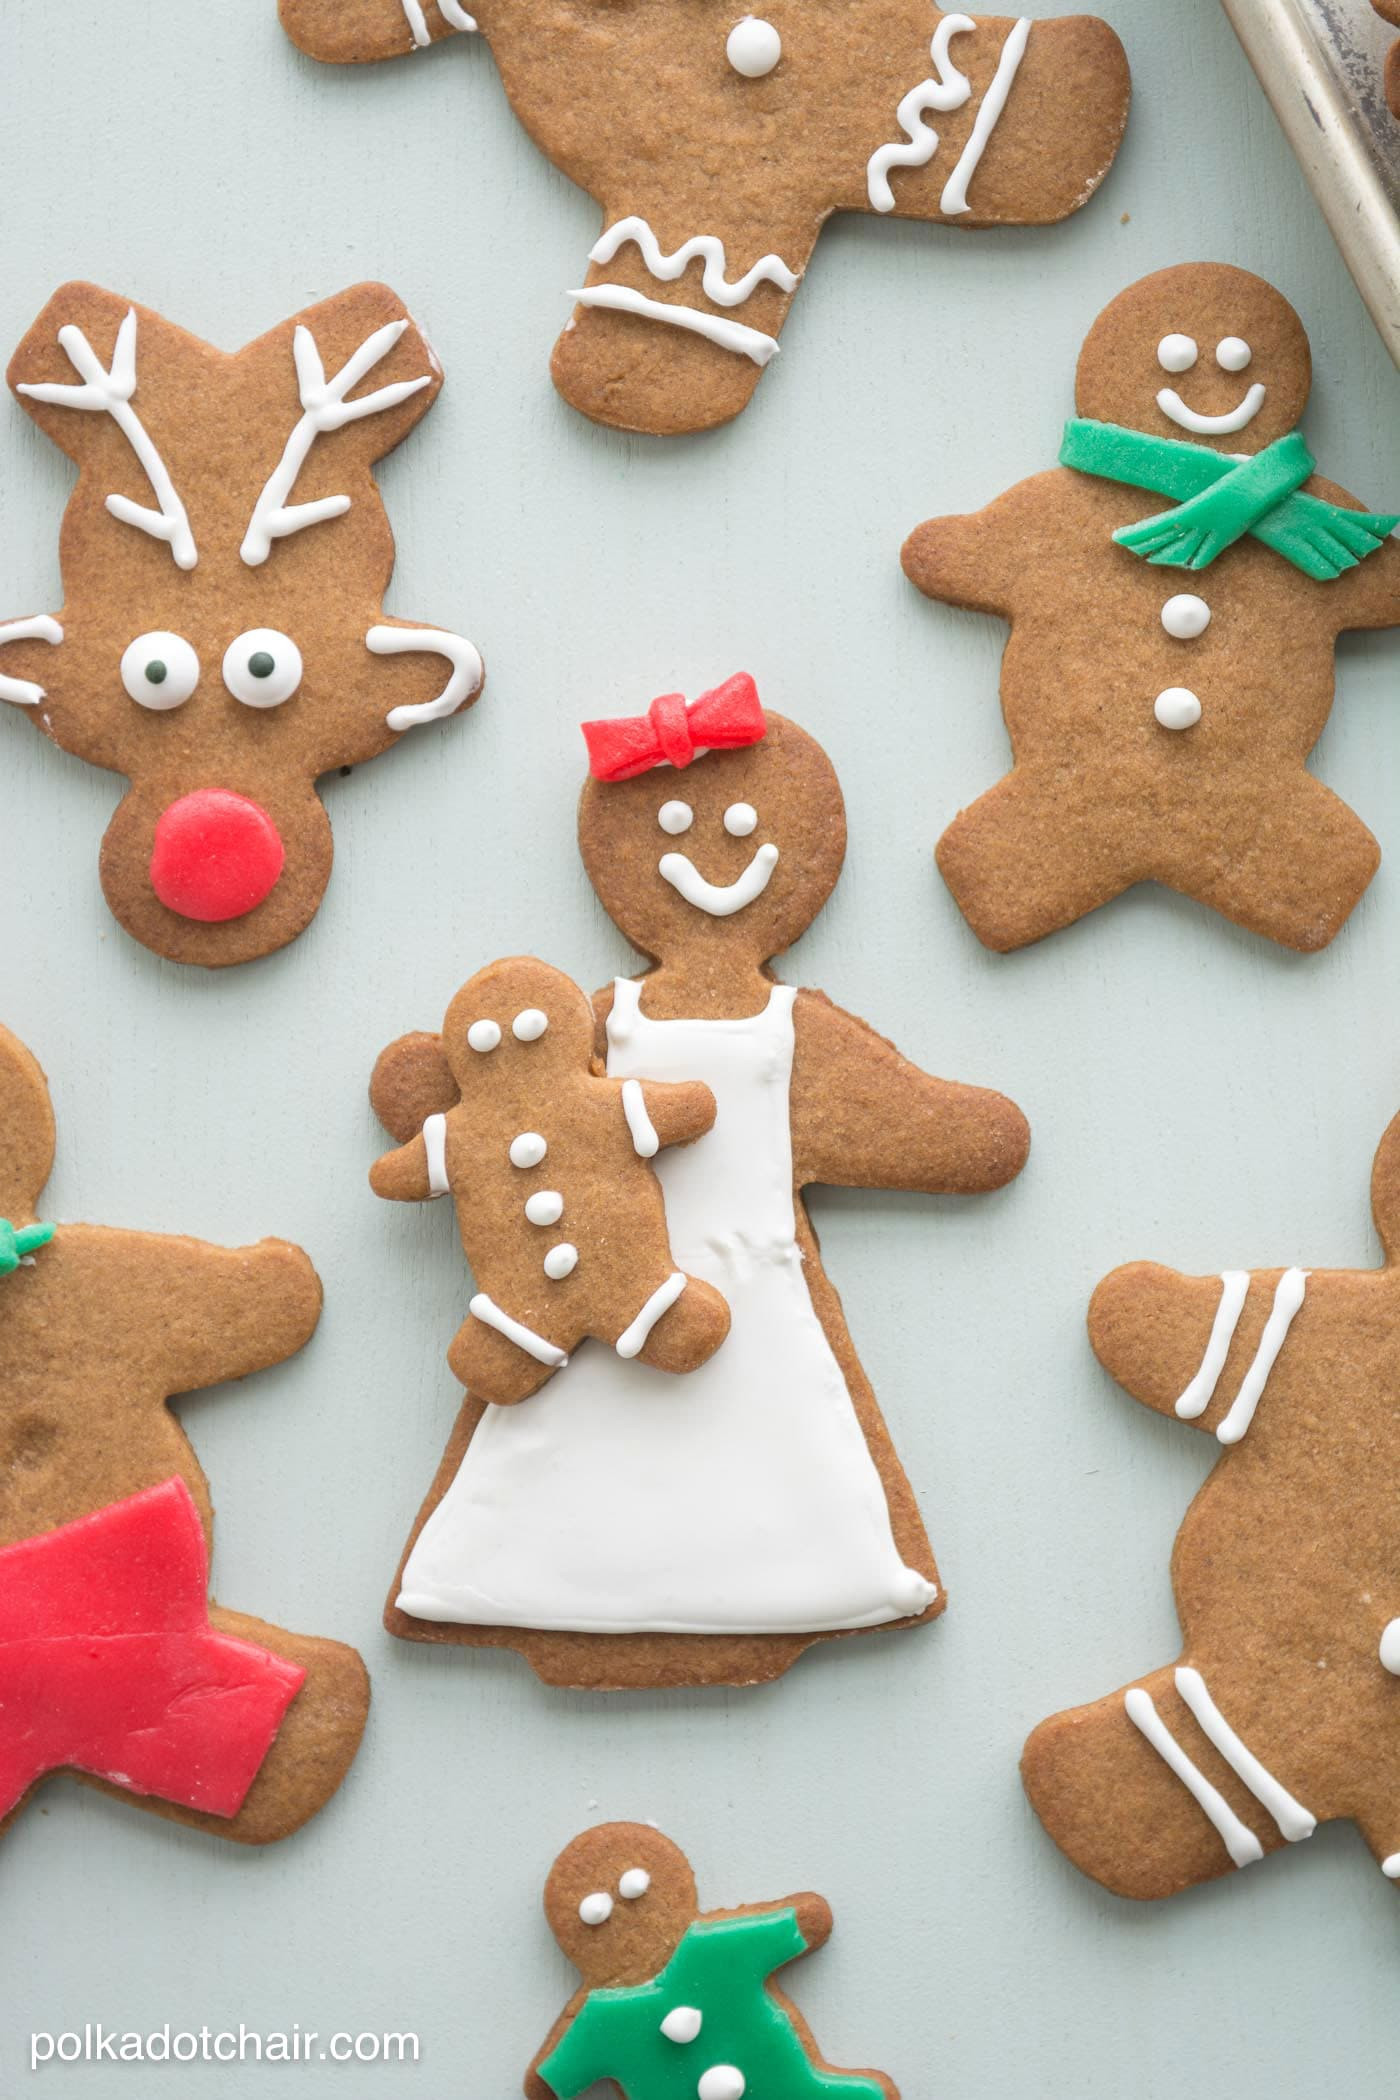 Ginger Bread Christmas Cookies
 Gingerbread Cookie Decorating Ideas The Polka Dot Chair